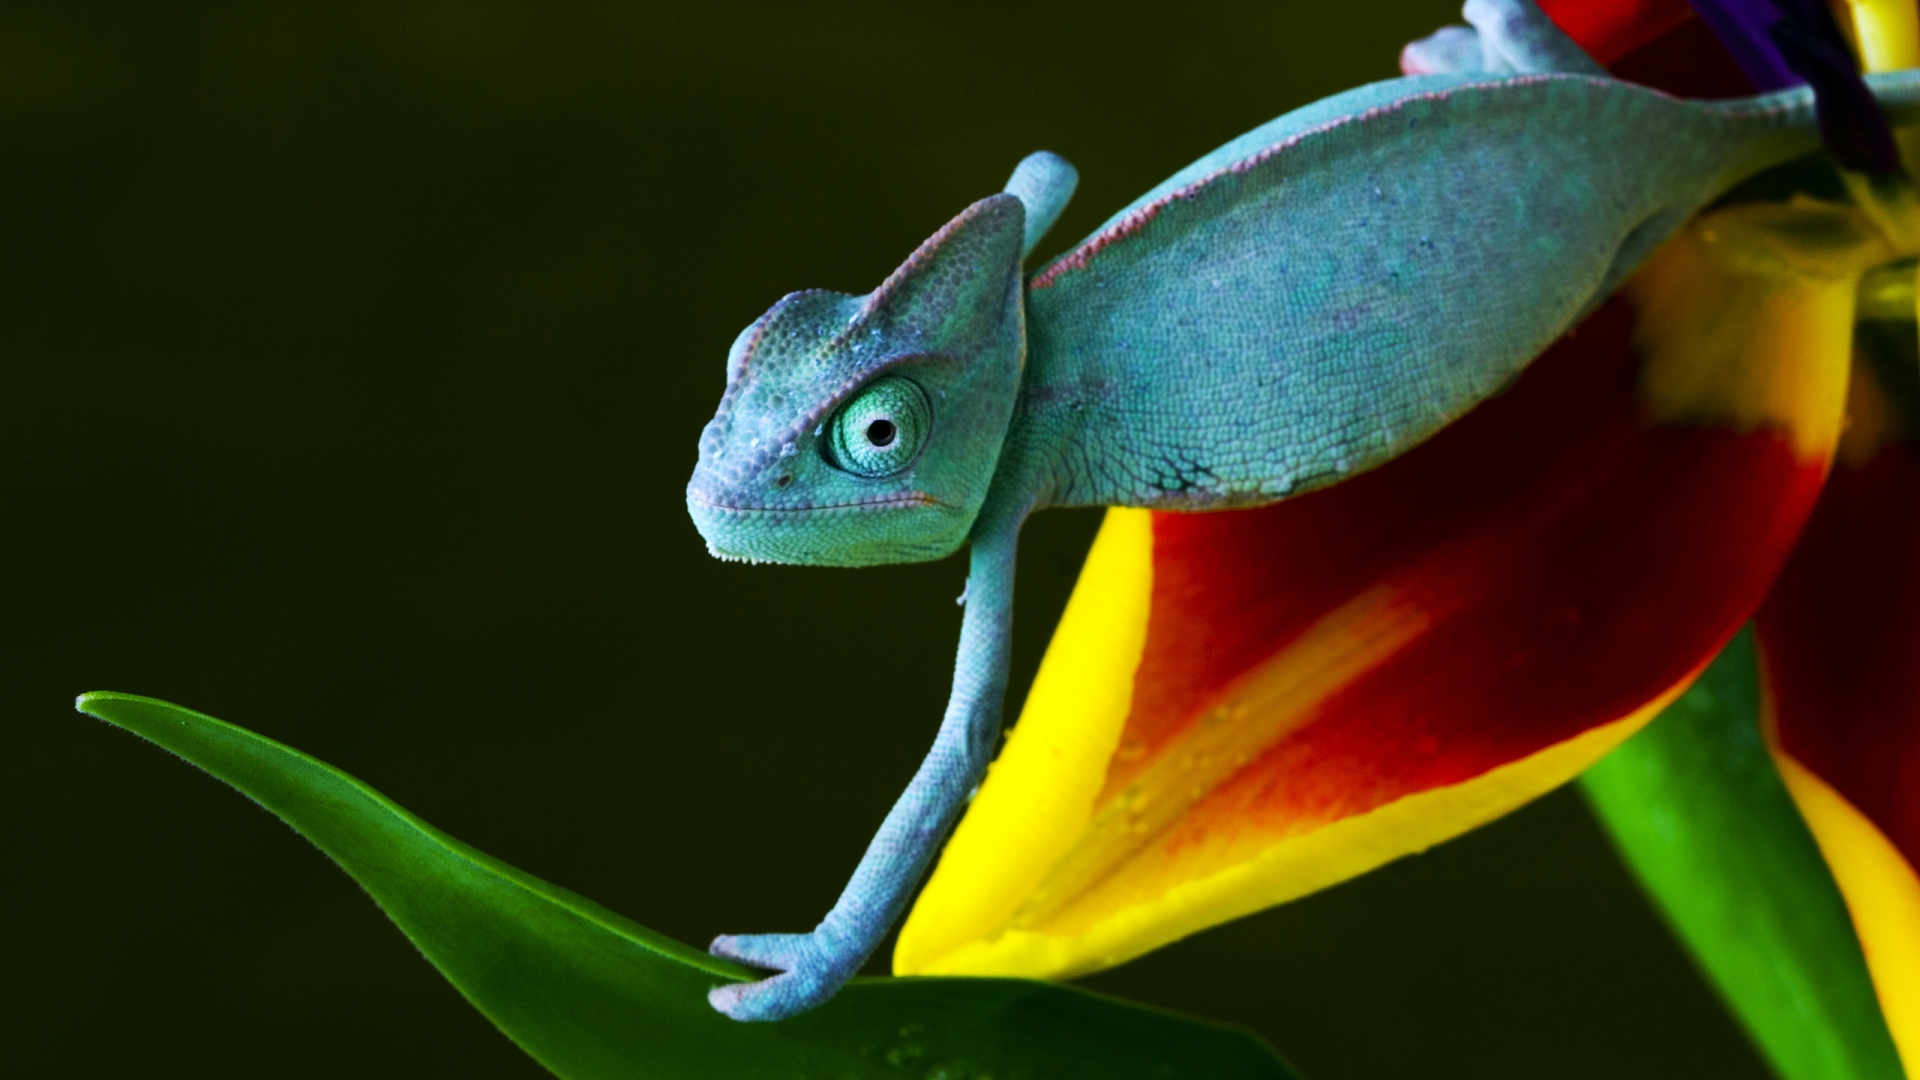 Baby Reptile for 1920 x 1080 HDTV 1080p resolution